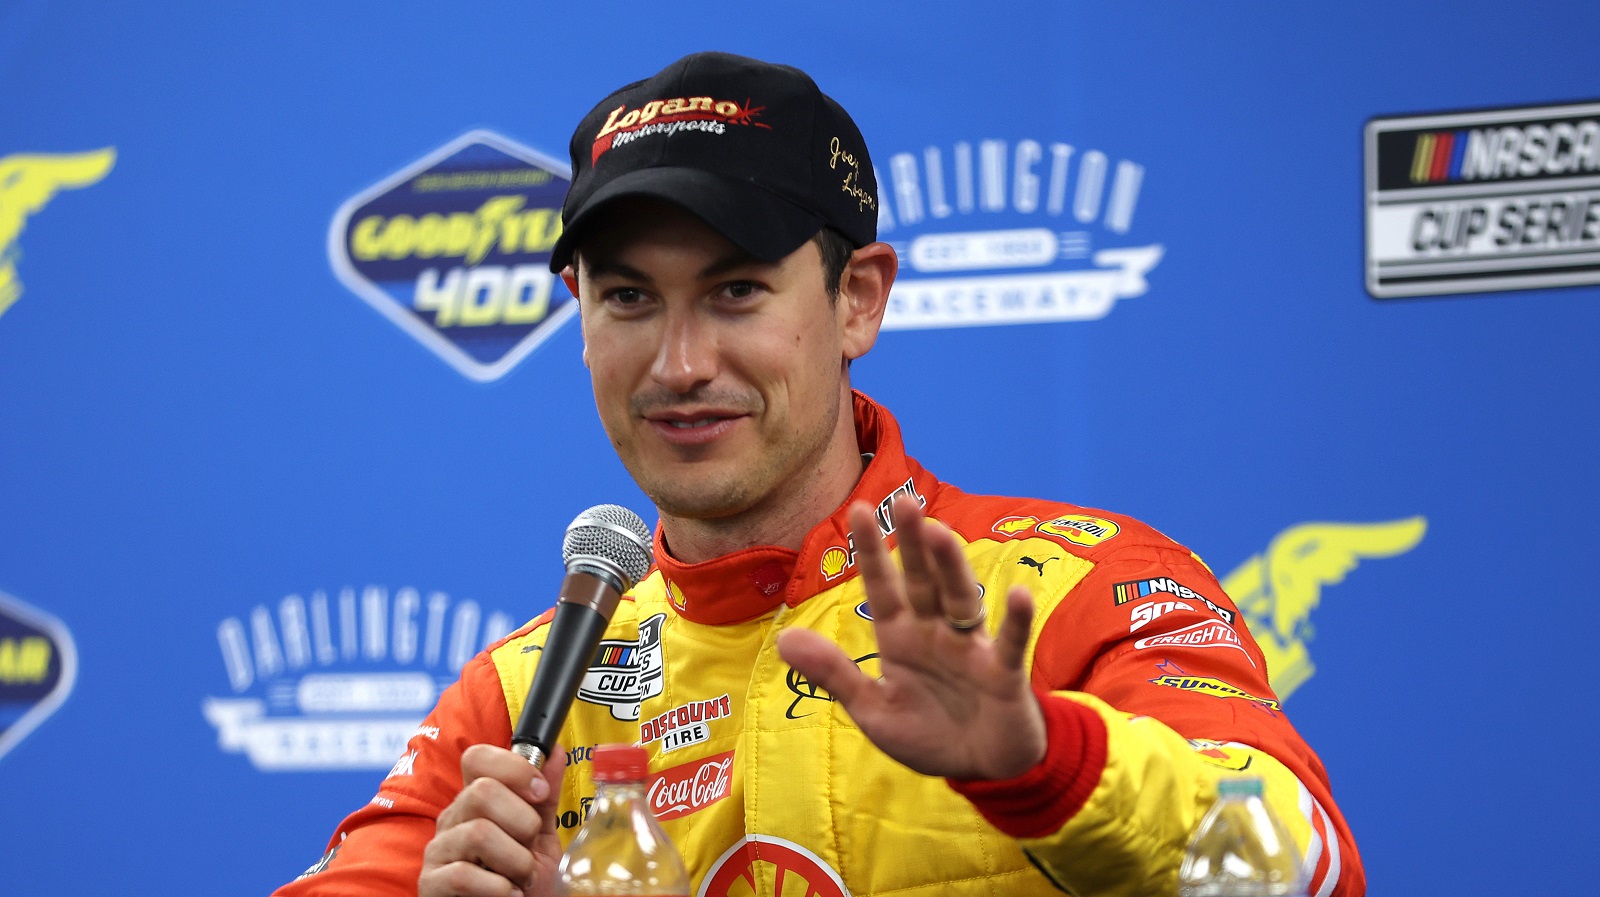 Joey Logano speaks to the media after winning the NASCAR Cup Series Goodyear 400 at Darlington Raceway on May 8, 2022. | James Gilbert/Getty Images